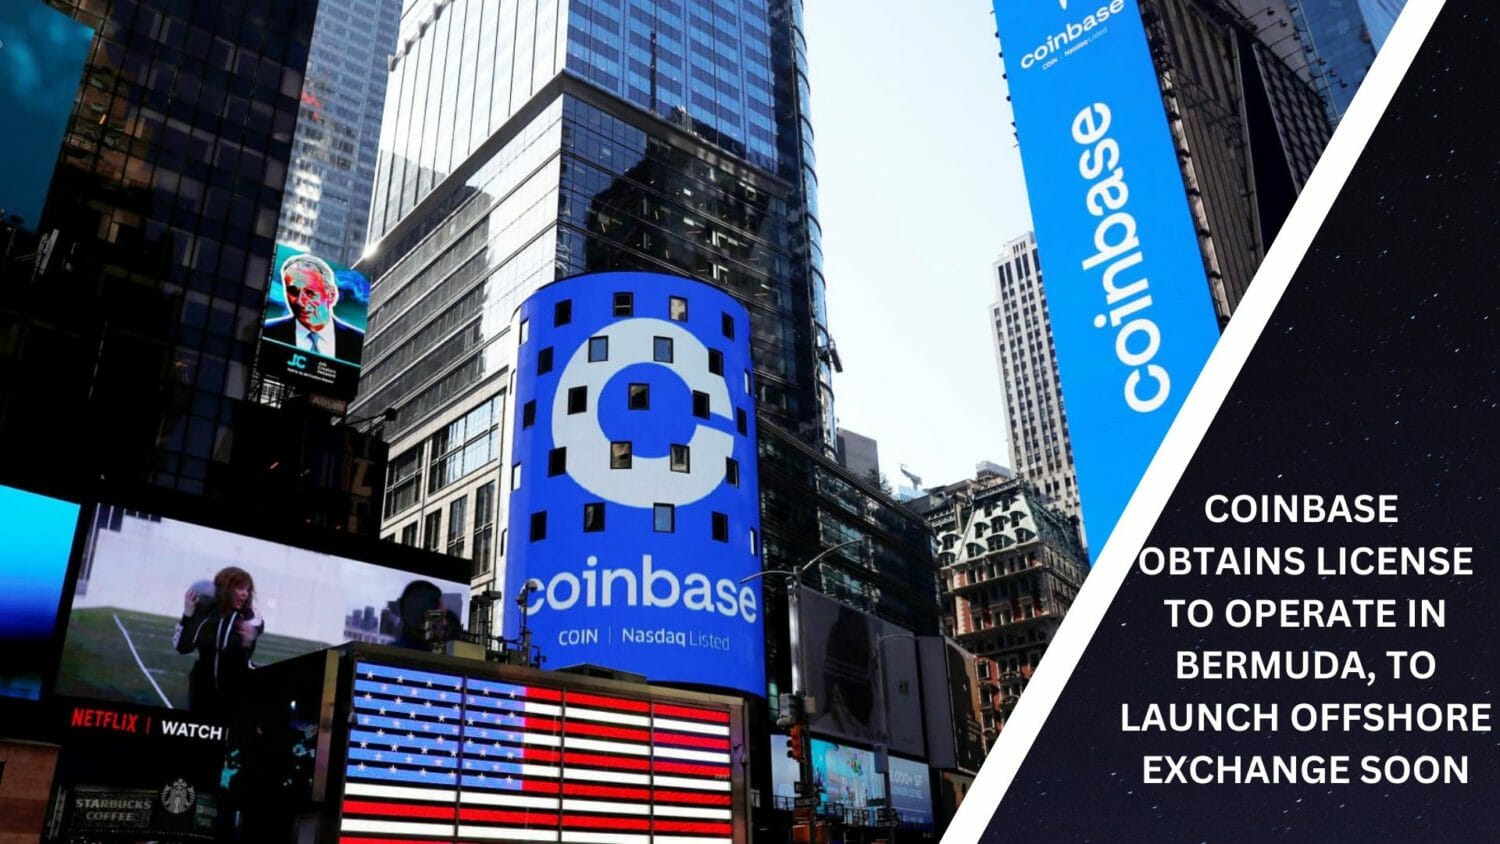 Coinbase Obtains A License To Operate In Bermuda, To Launch Offshore Exchange Soon